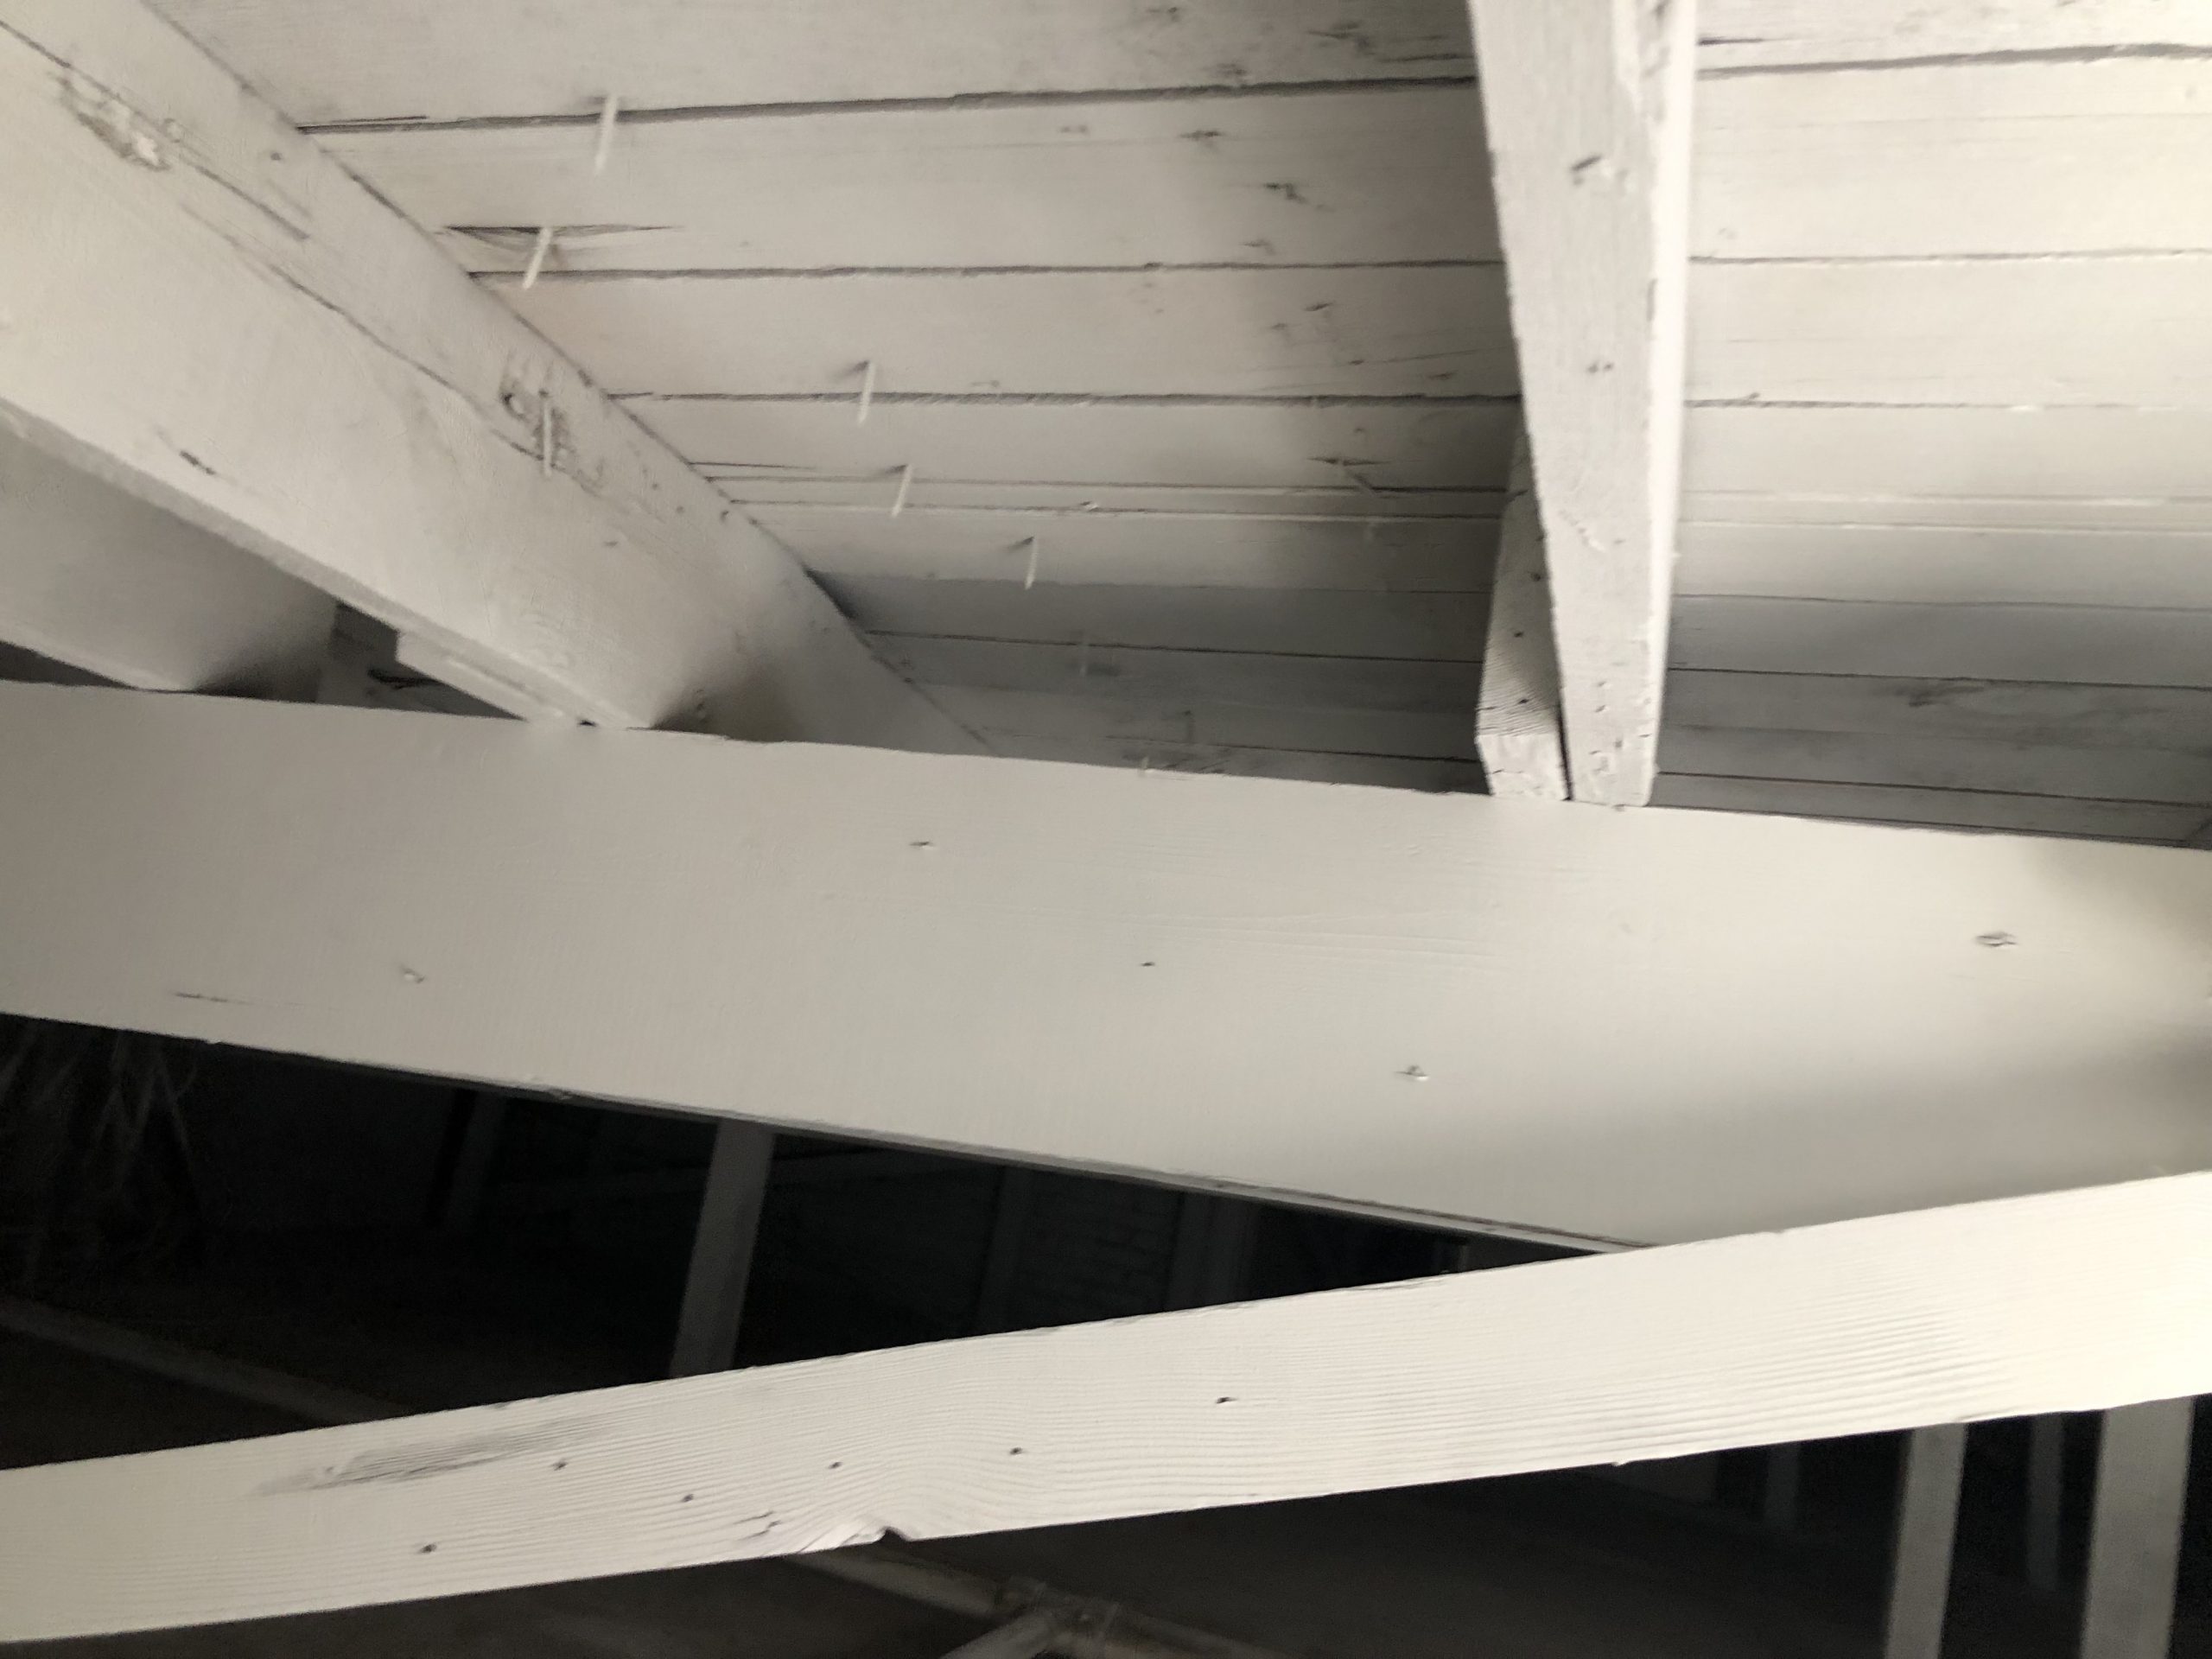 blasting attic space after white paint and cleaning